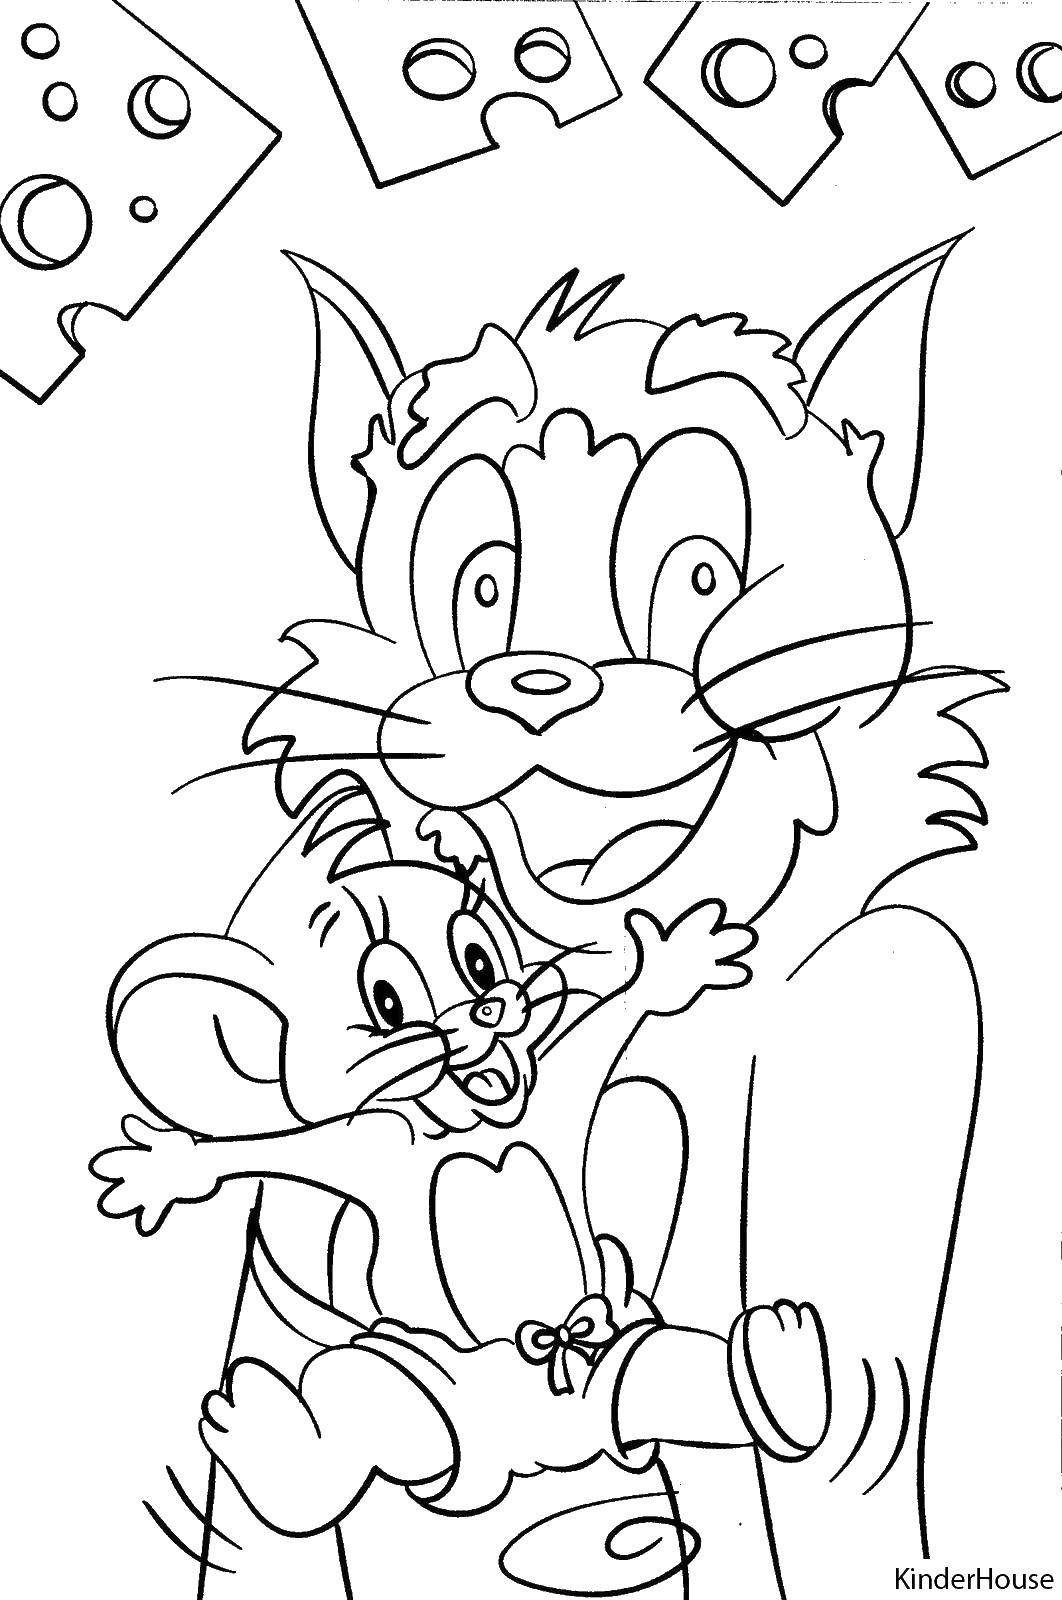 Coloring Tom and Jerry with cheese. Category Tom and Jerry. Tags:  Character cartoon, Tom and Jerry.